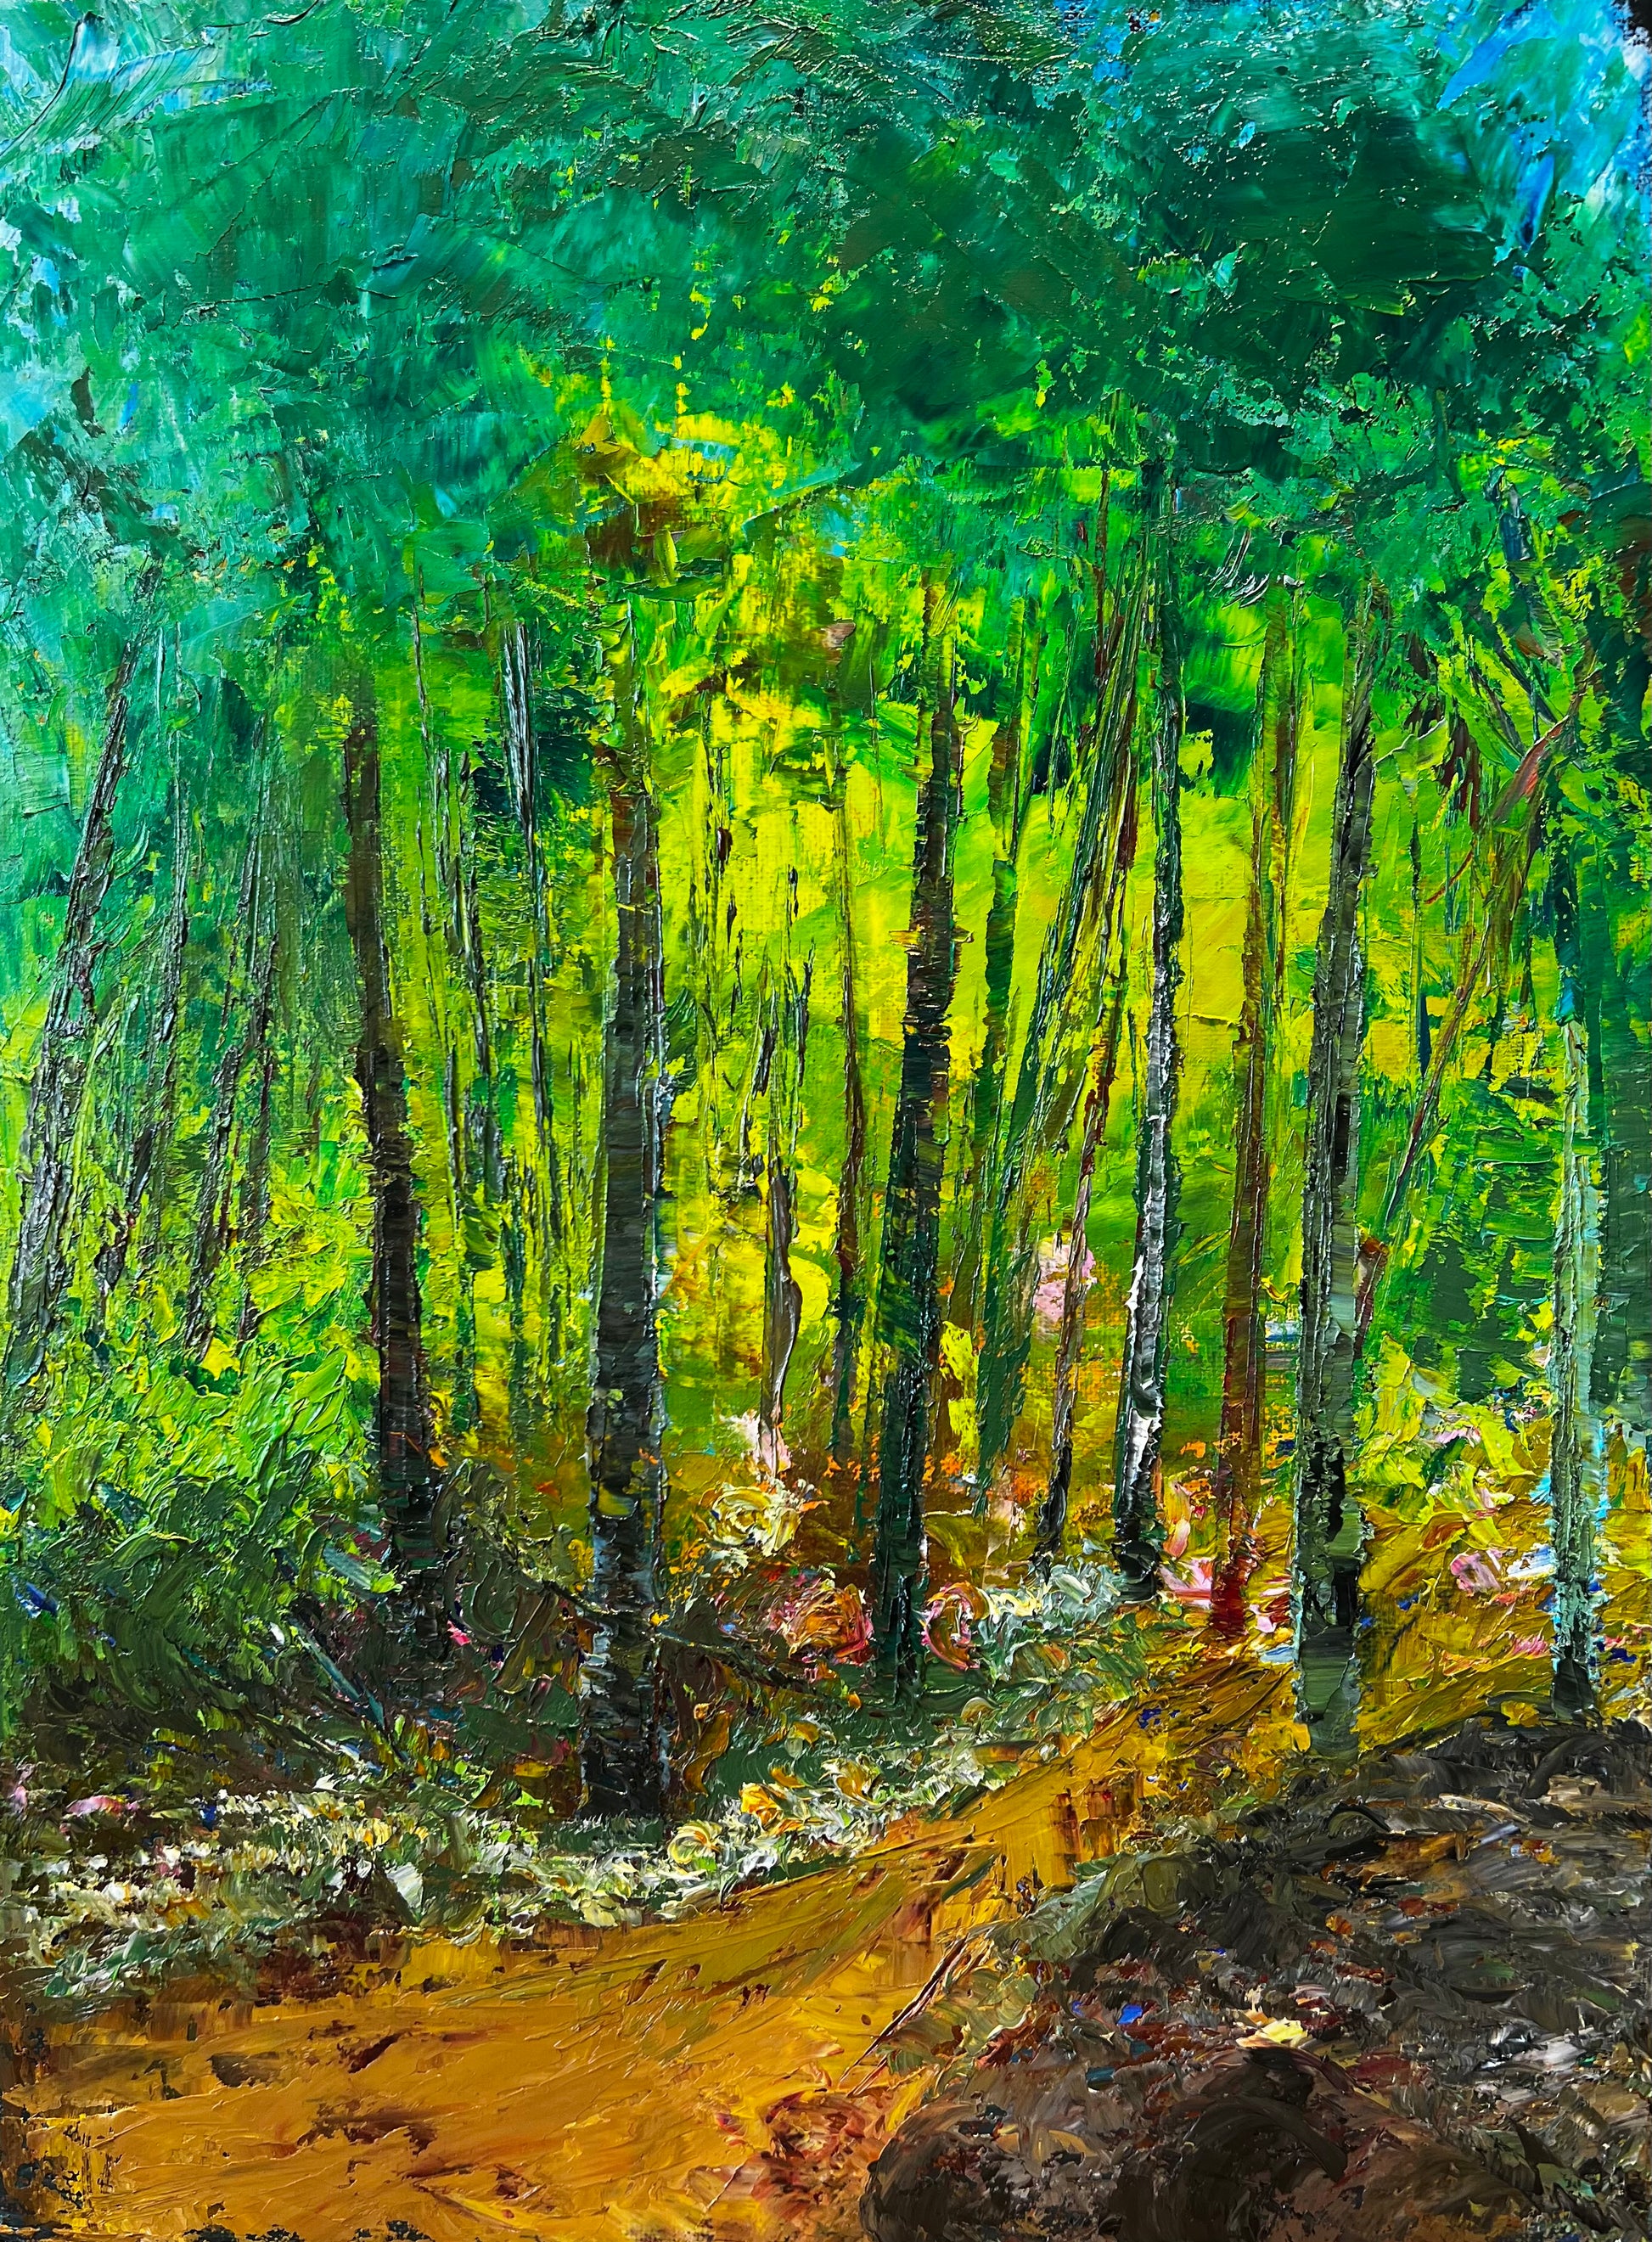 Abstract impressionist painting of a path through a forest with light dappling through the leaves in the background